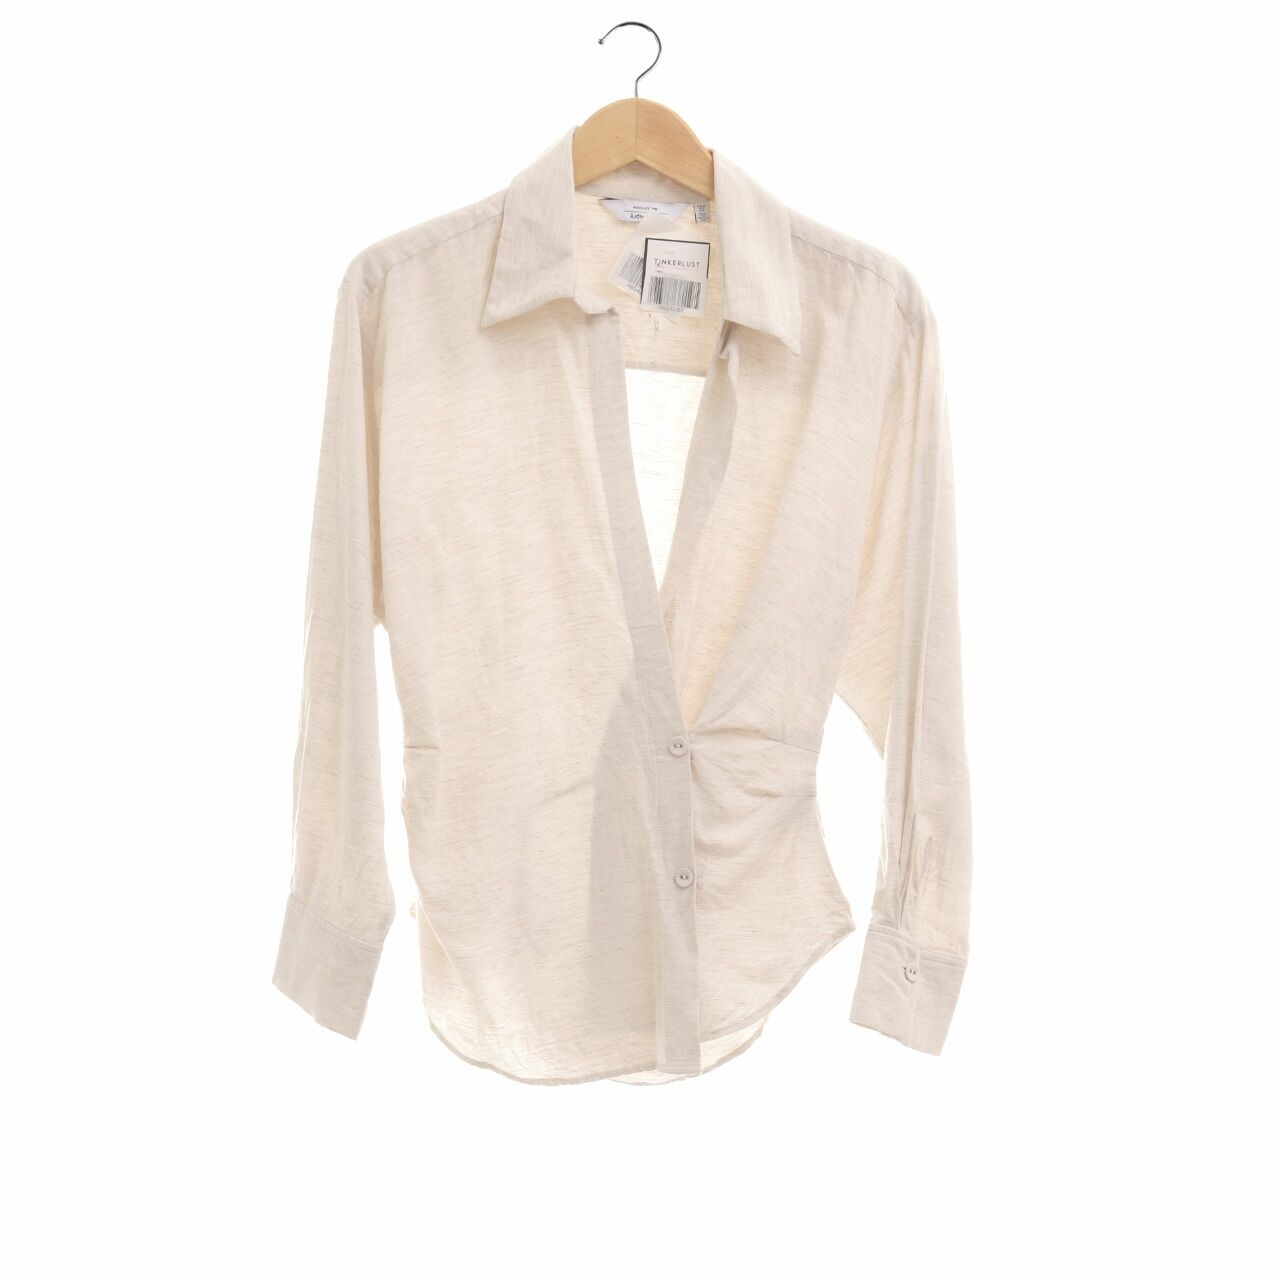 & Other Stories Ivory Shirt